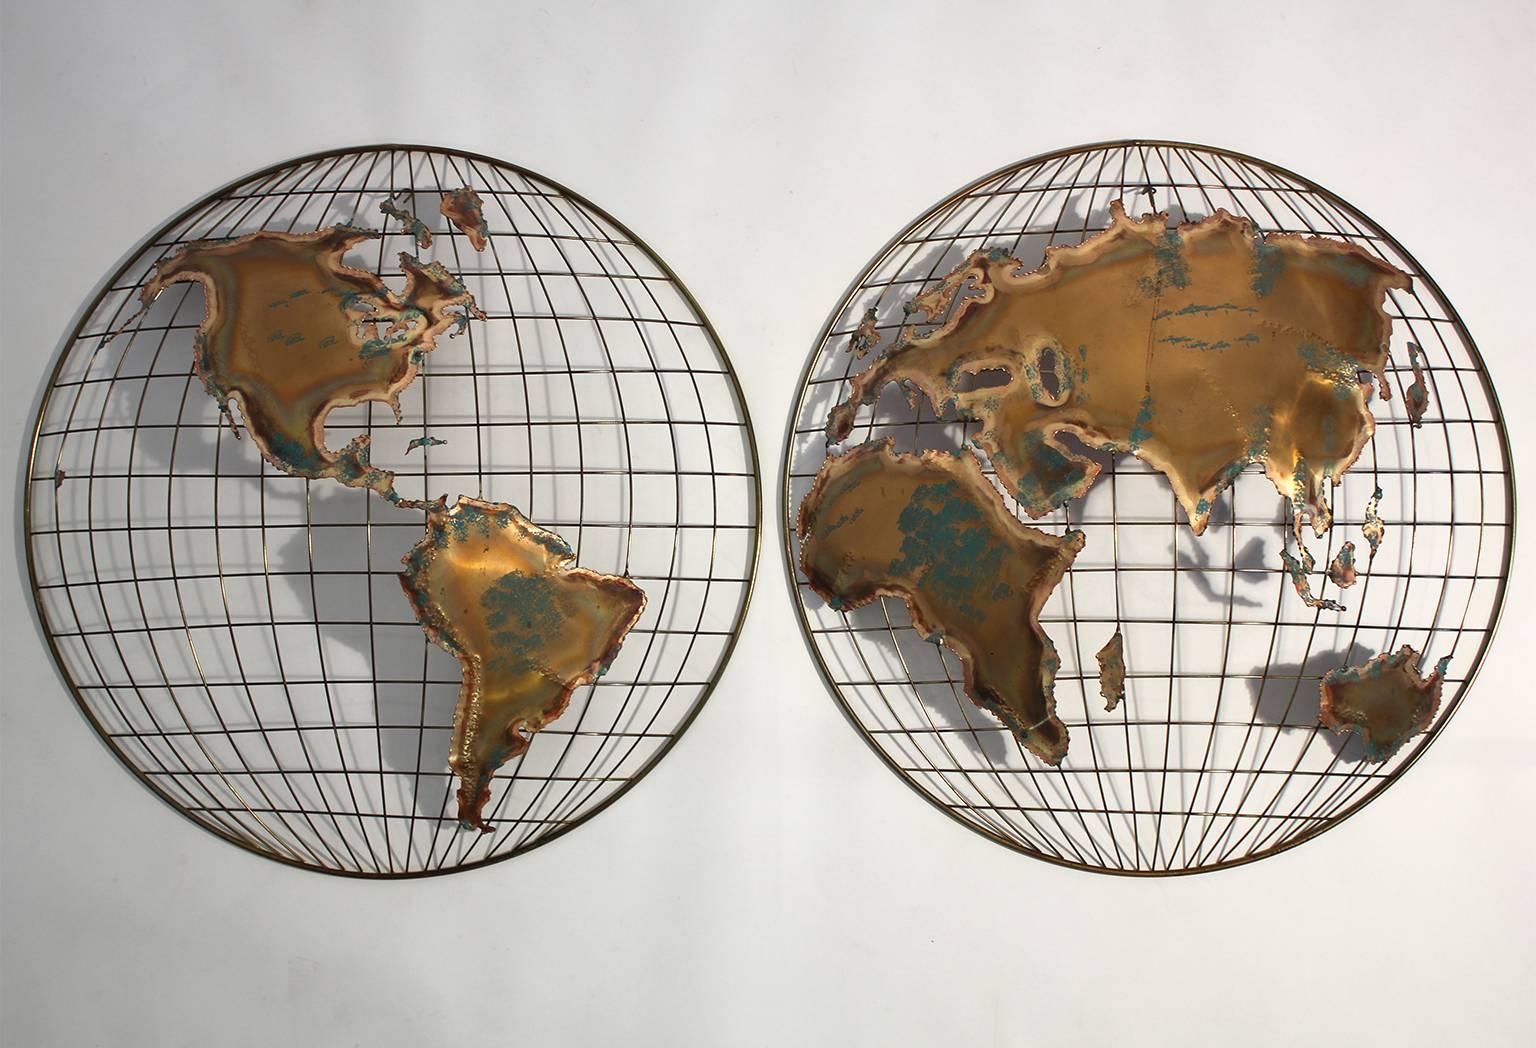 Wall mounted continents/world map/globe/hemispheres sculpture from C. Jere in excellent vintage condition. Each hemisphere measures 27.5